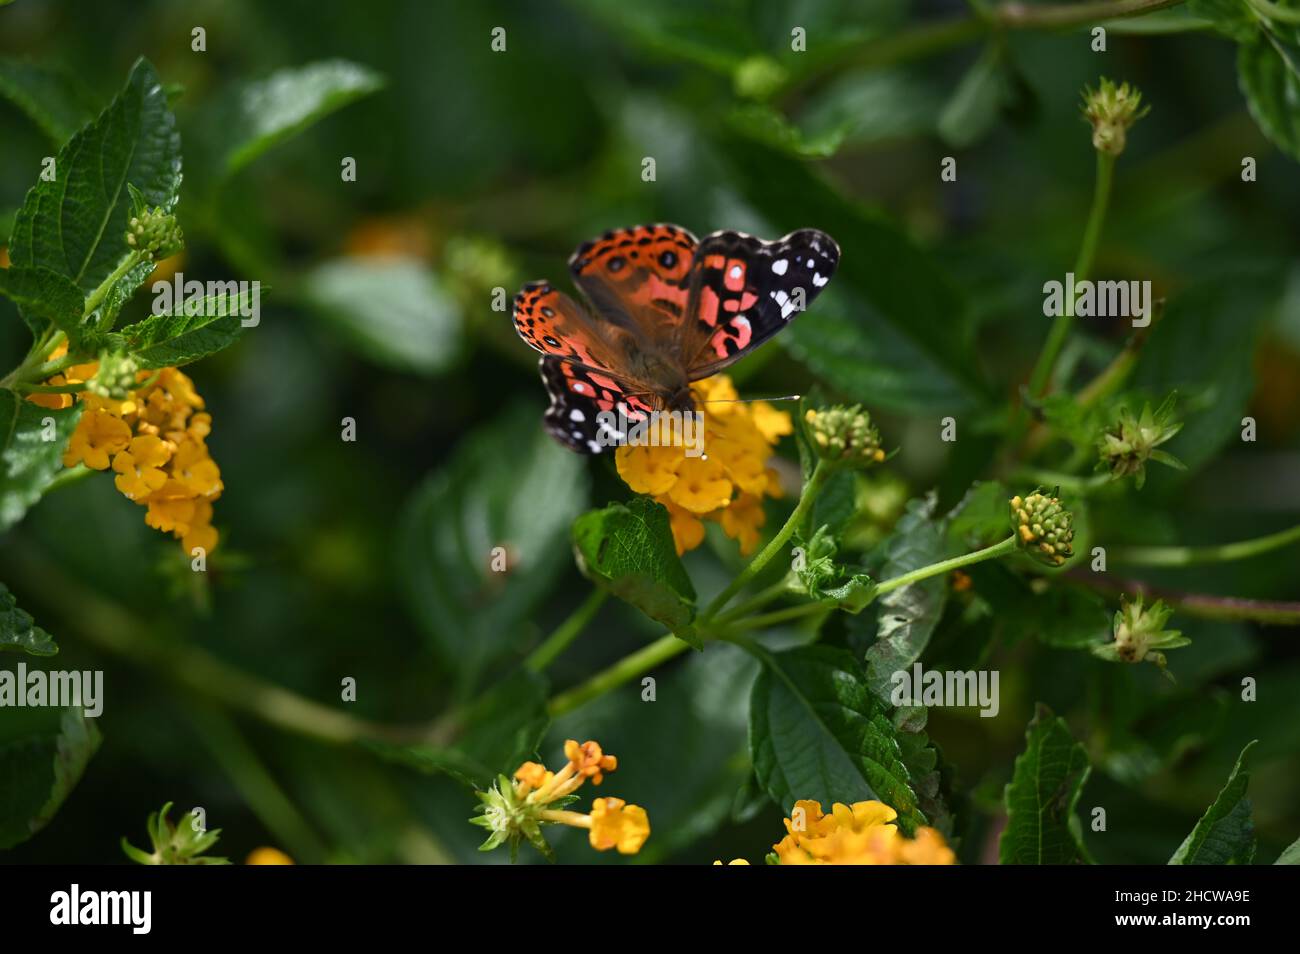 Red and Black Butterfly in a small garden Stock Photo